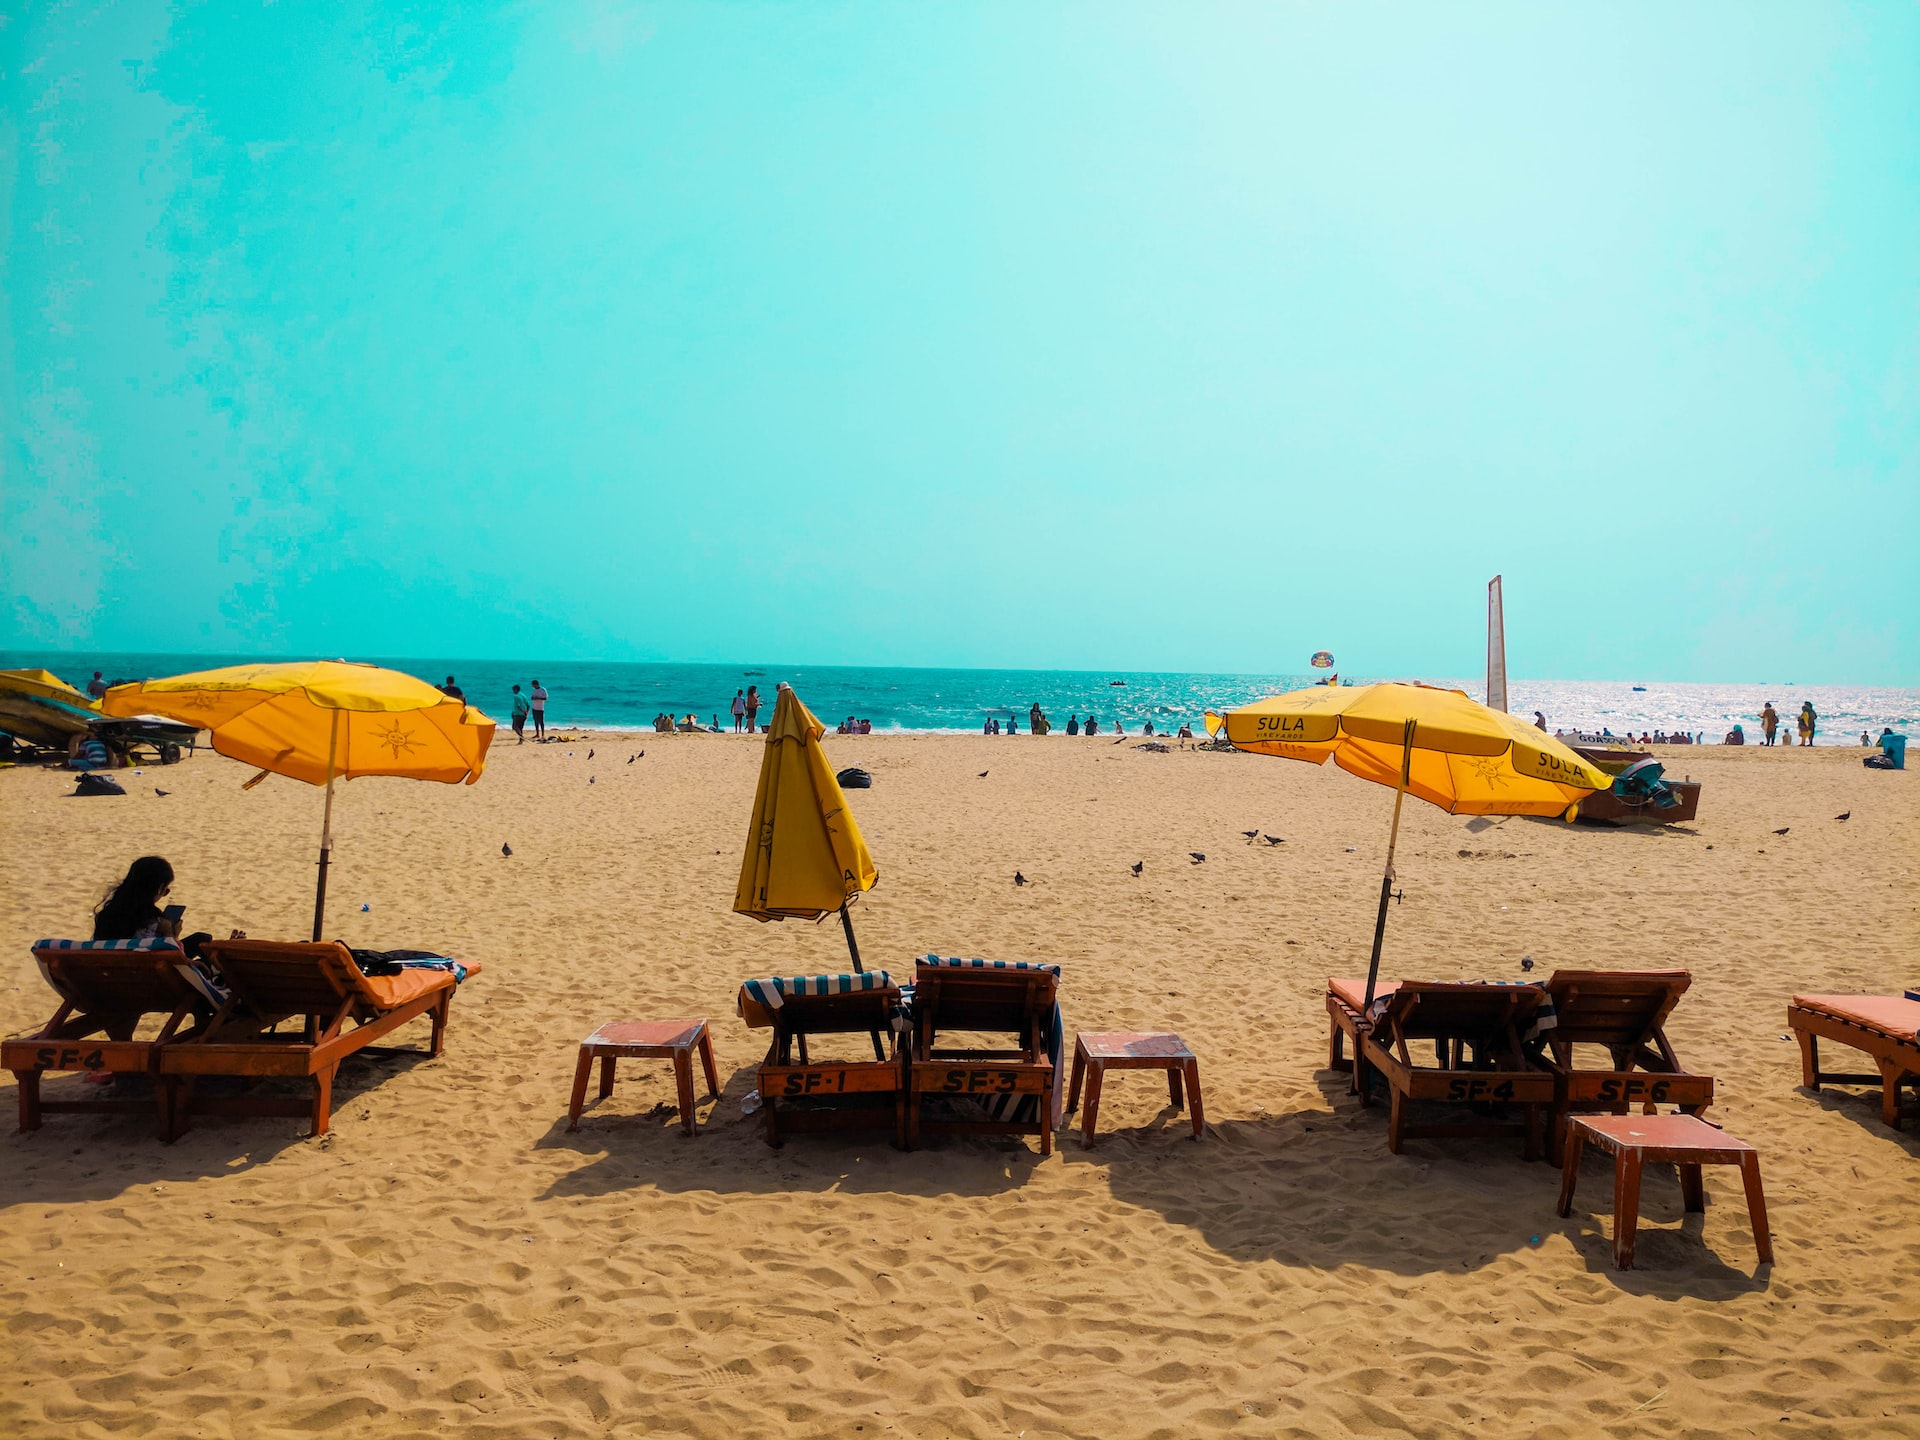 The Best Beach Destinations in India: A Guide to the Country’s Most Beautiful Coastal Locations